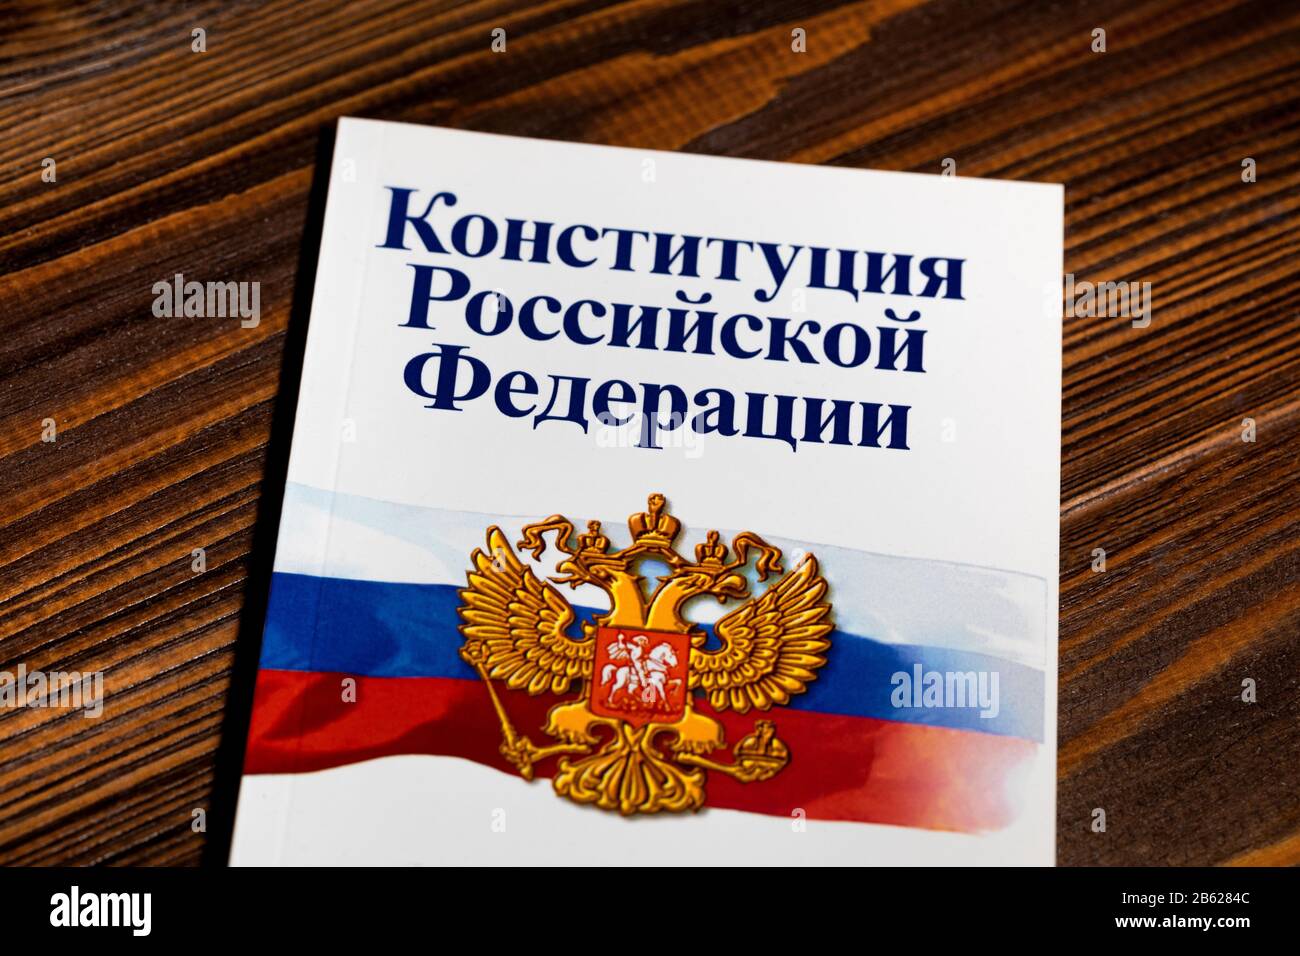 The brochure 'Constitution of the Russian Federation' are on a wooden table Stock Photo